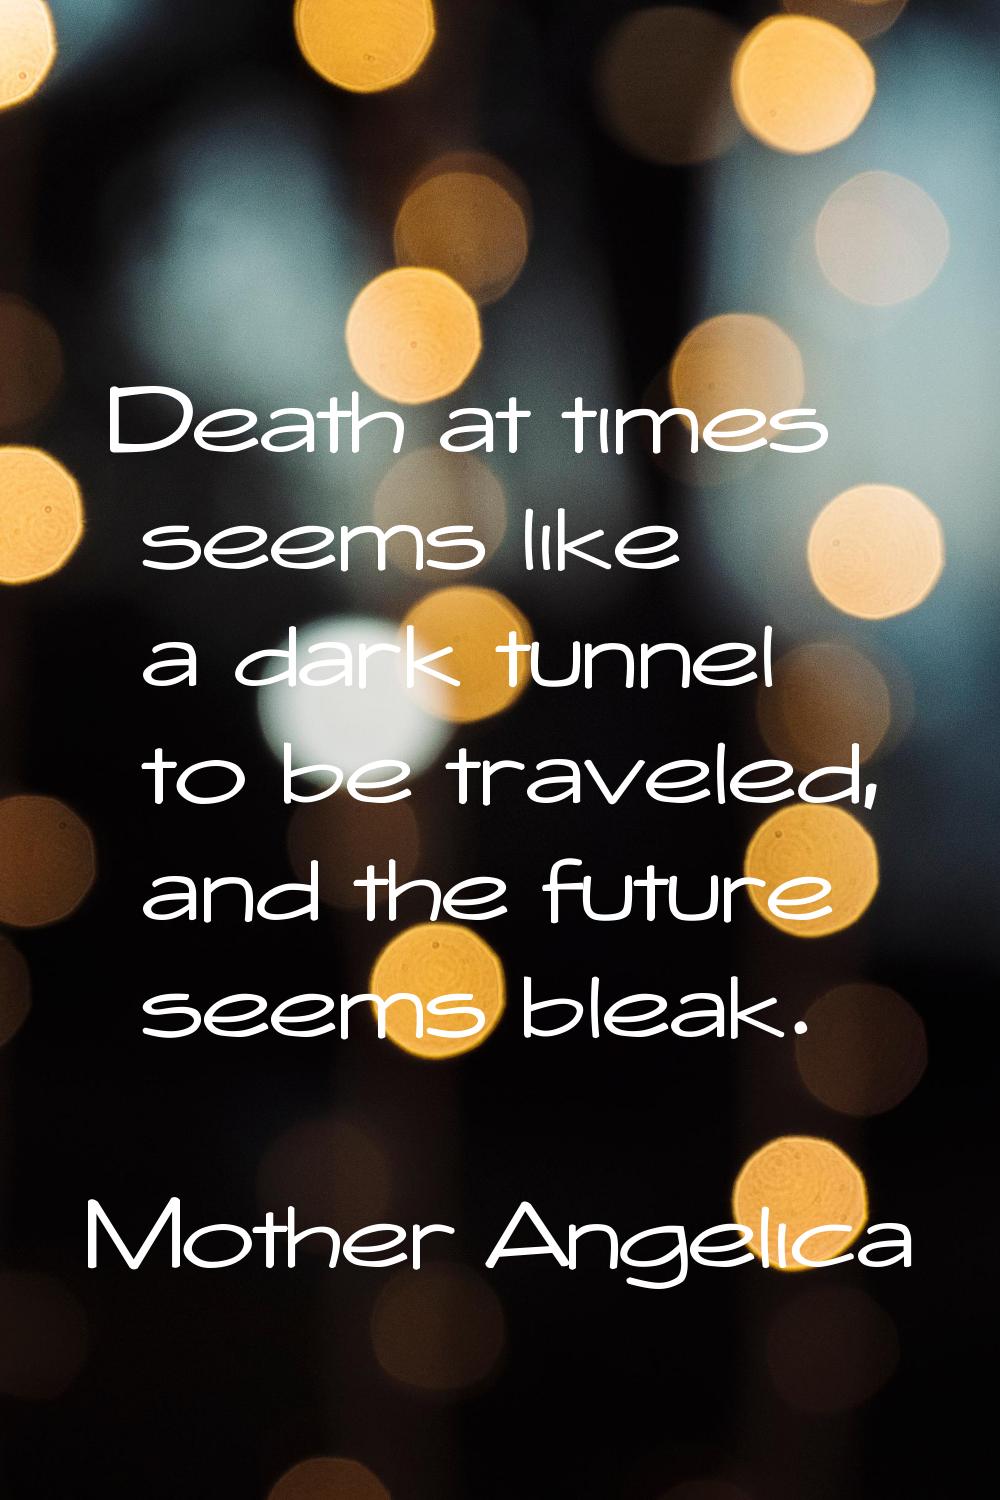 Death at times seems like a dark tunnel to be traveled, and the future seems bleak.